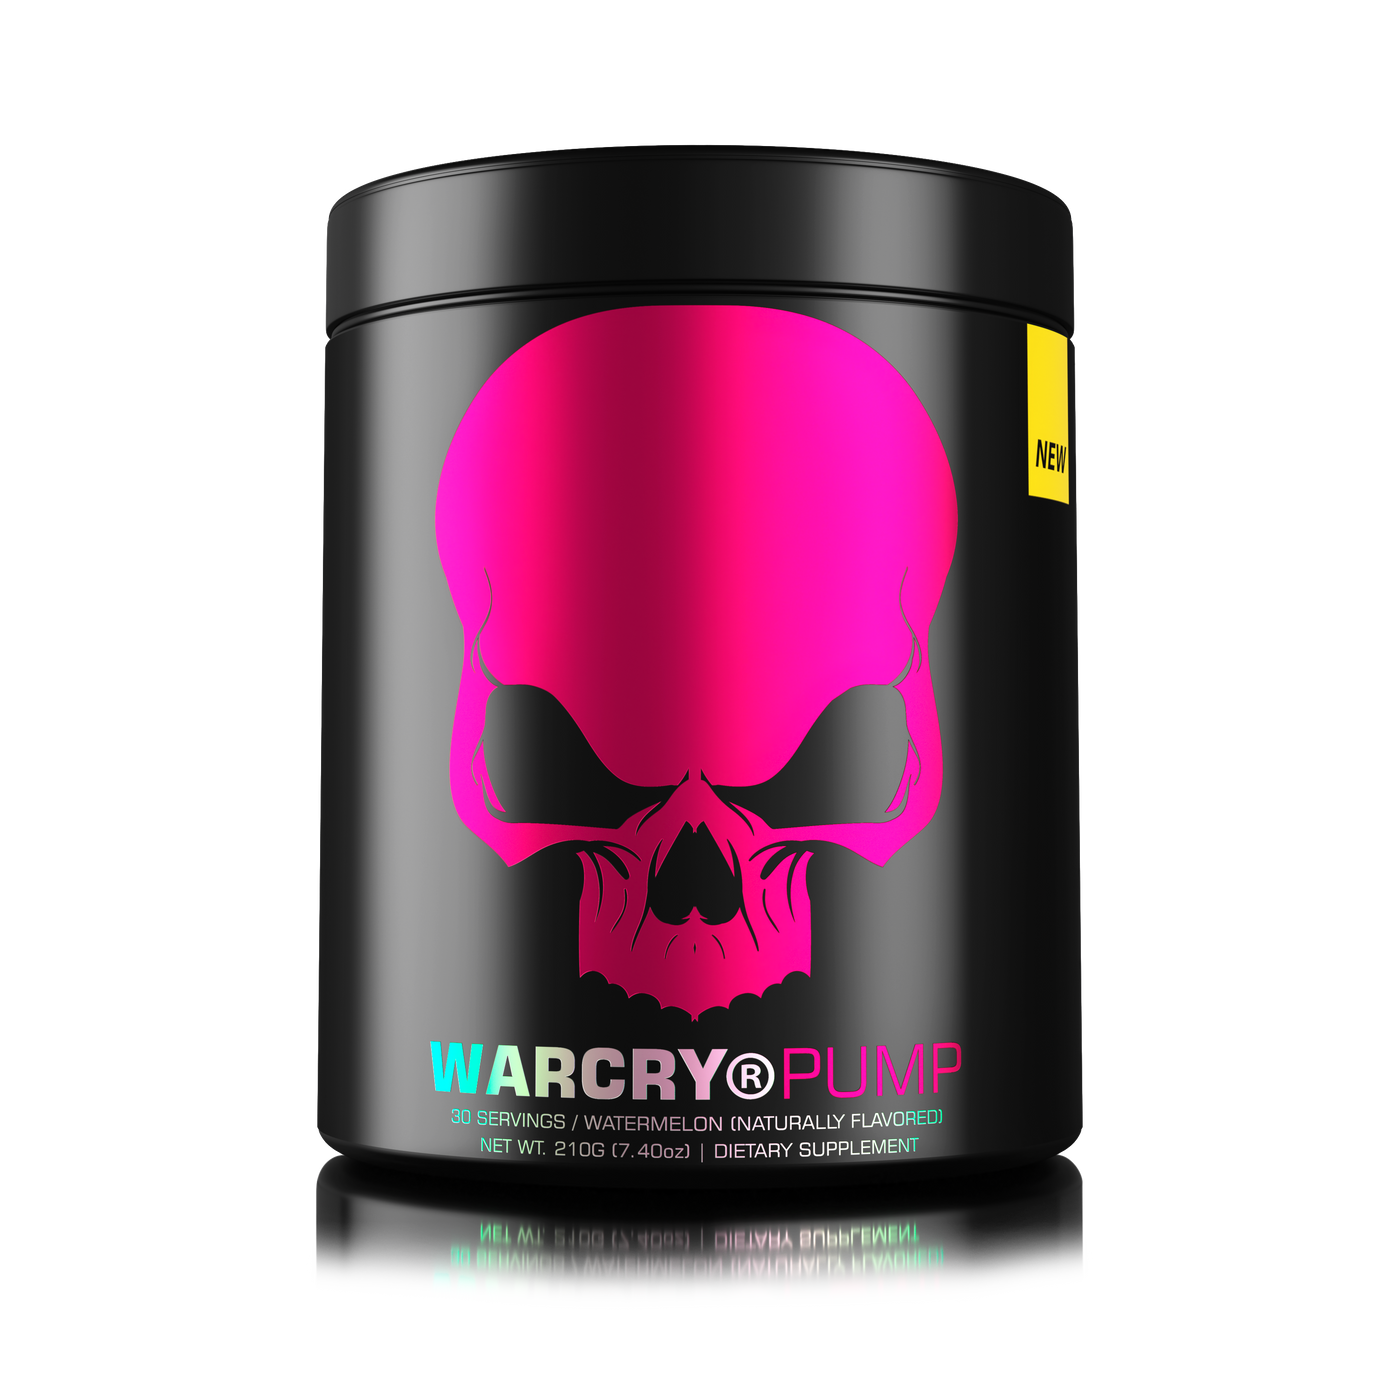 WARCRY PUMP, Pre-workout, 210g, 7.40oz, Watermelon, Naturally Flavored, Dietary Supplement, Shop now in US, Free Shipping in US, Made in USA